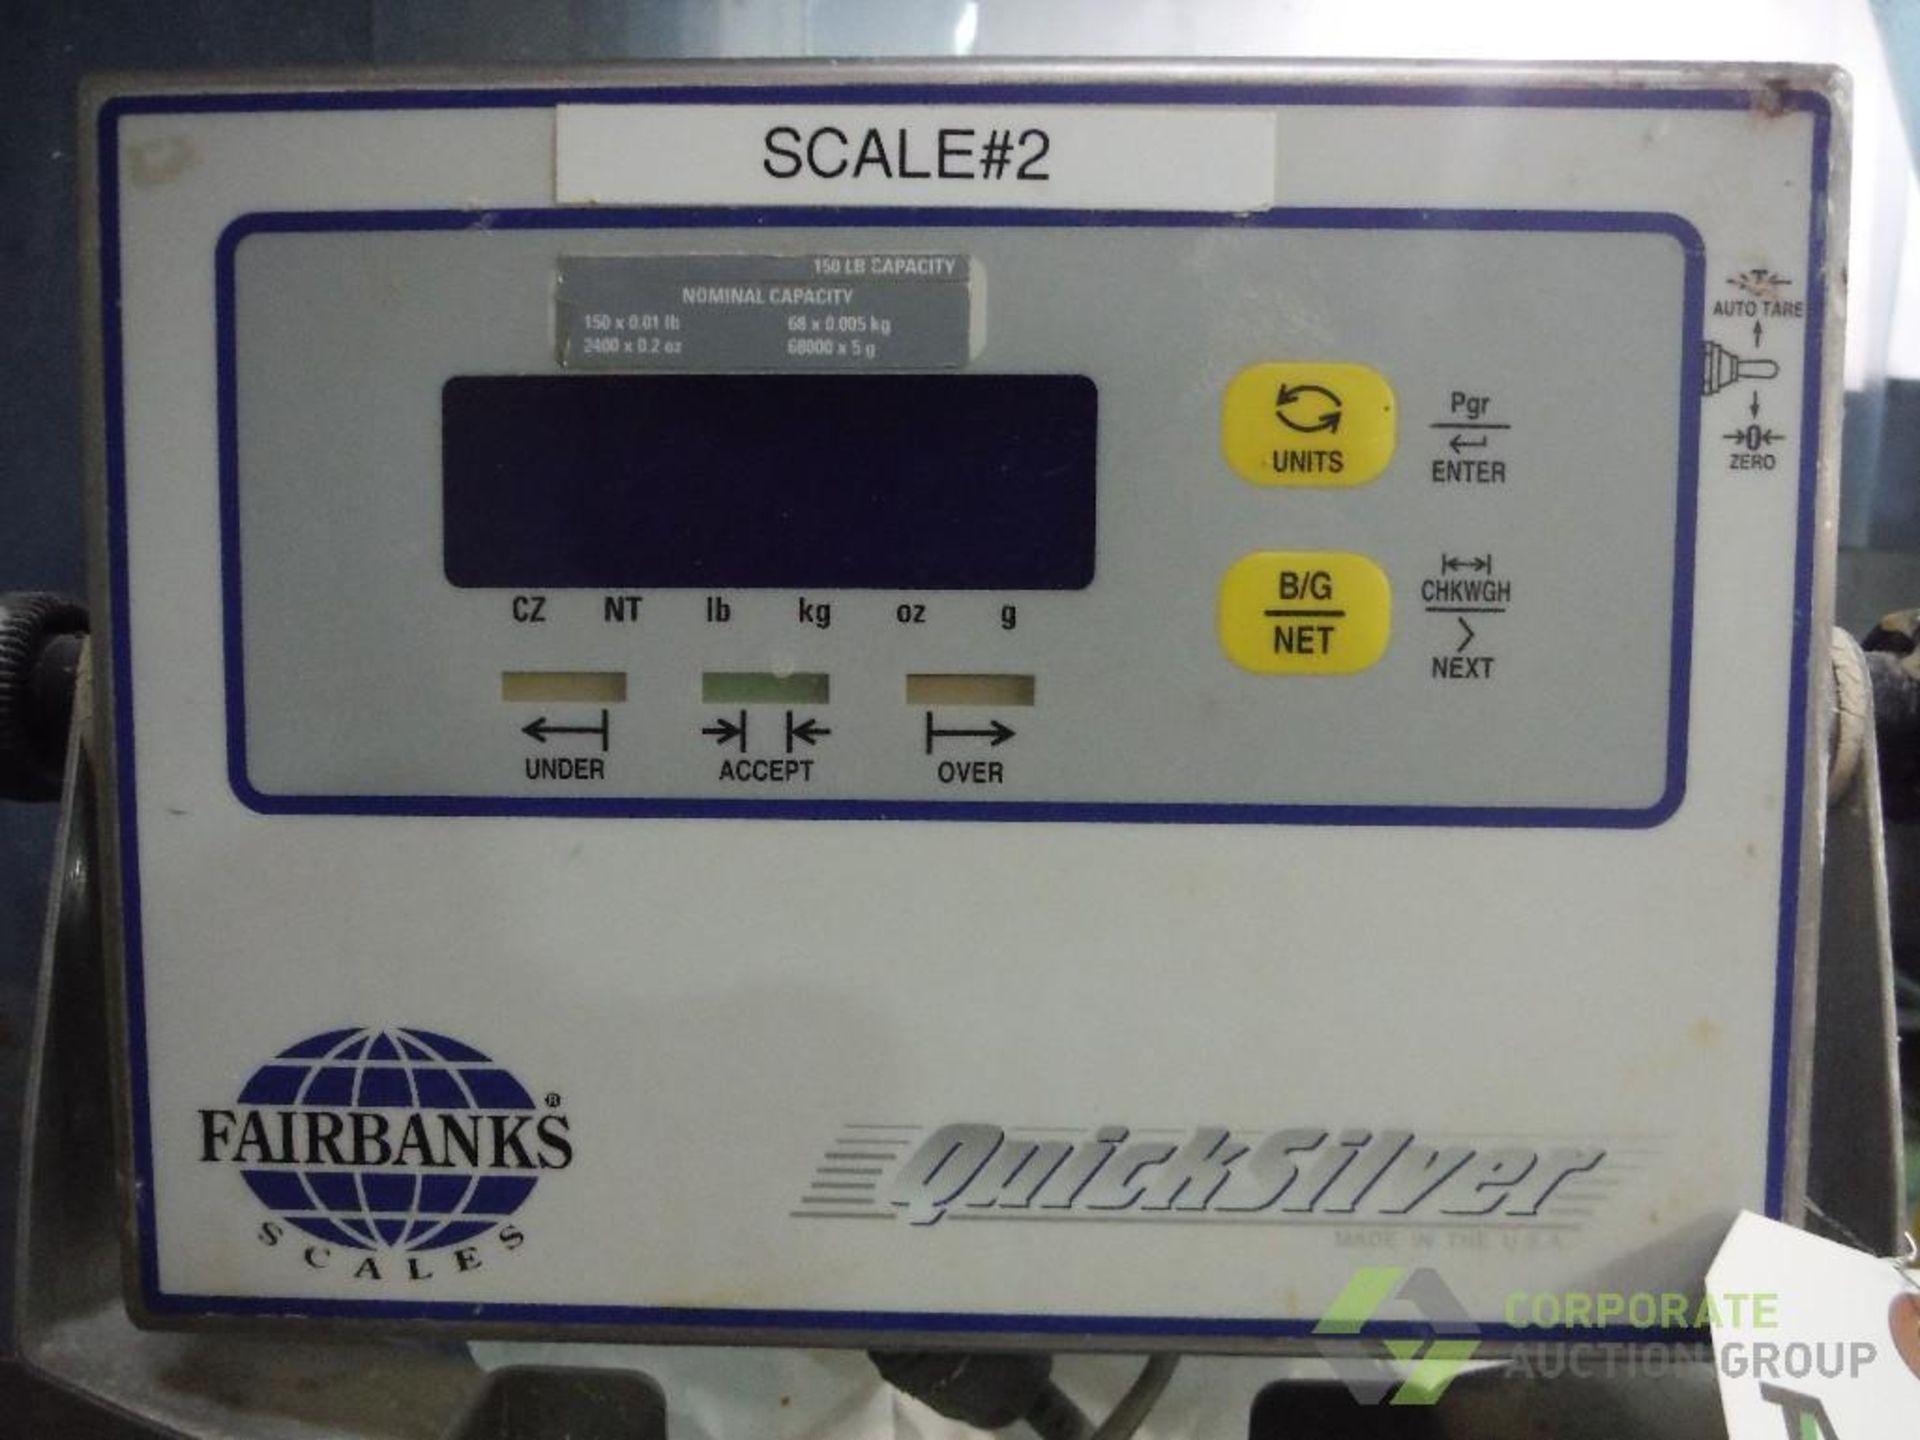 Fairbanks table top scale, Model IND-HR5000-1A, SN 691250030054, capacity 150 x 0.01 lbs., 18 in. - Image 2 of 4